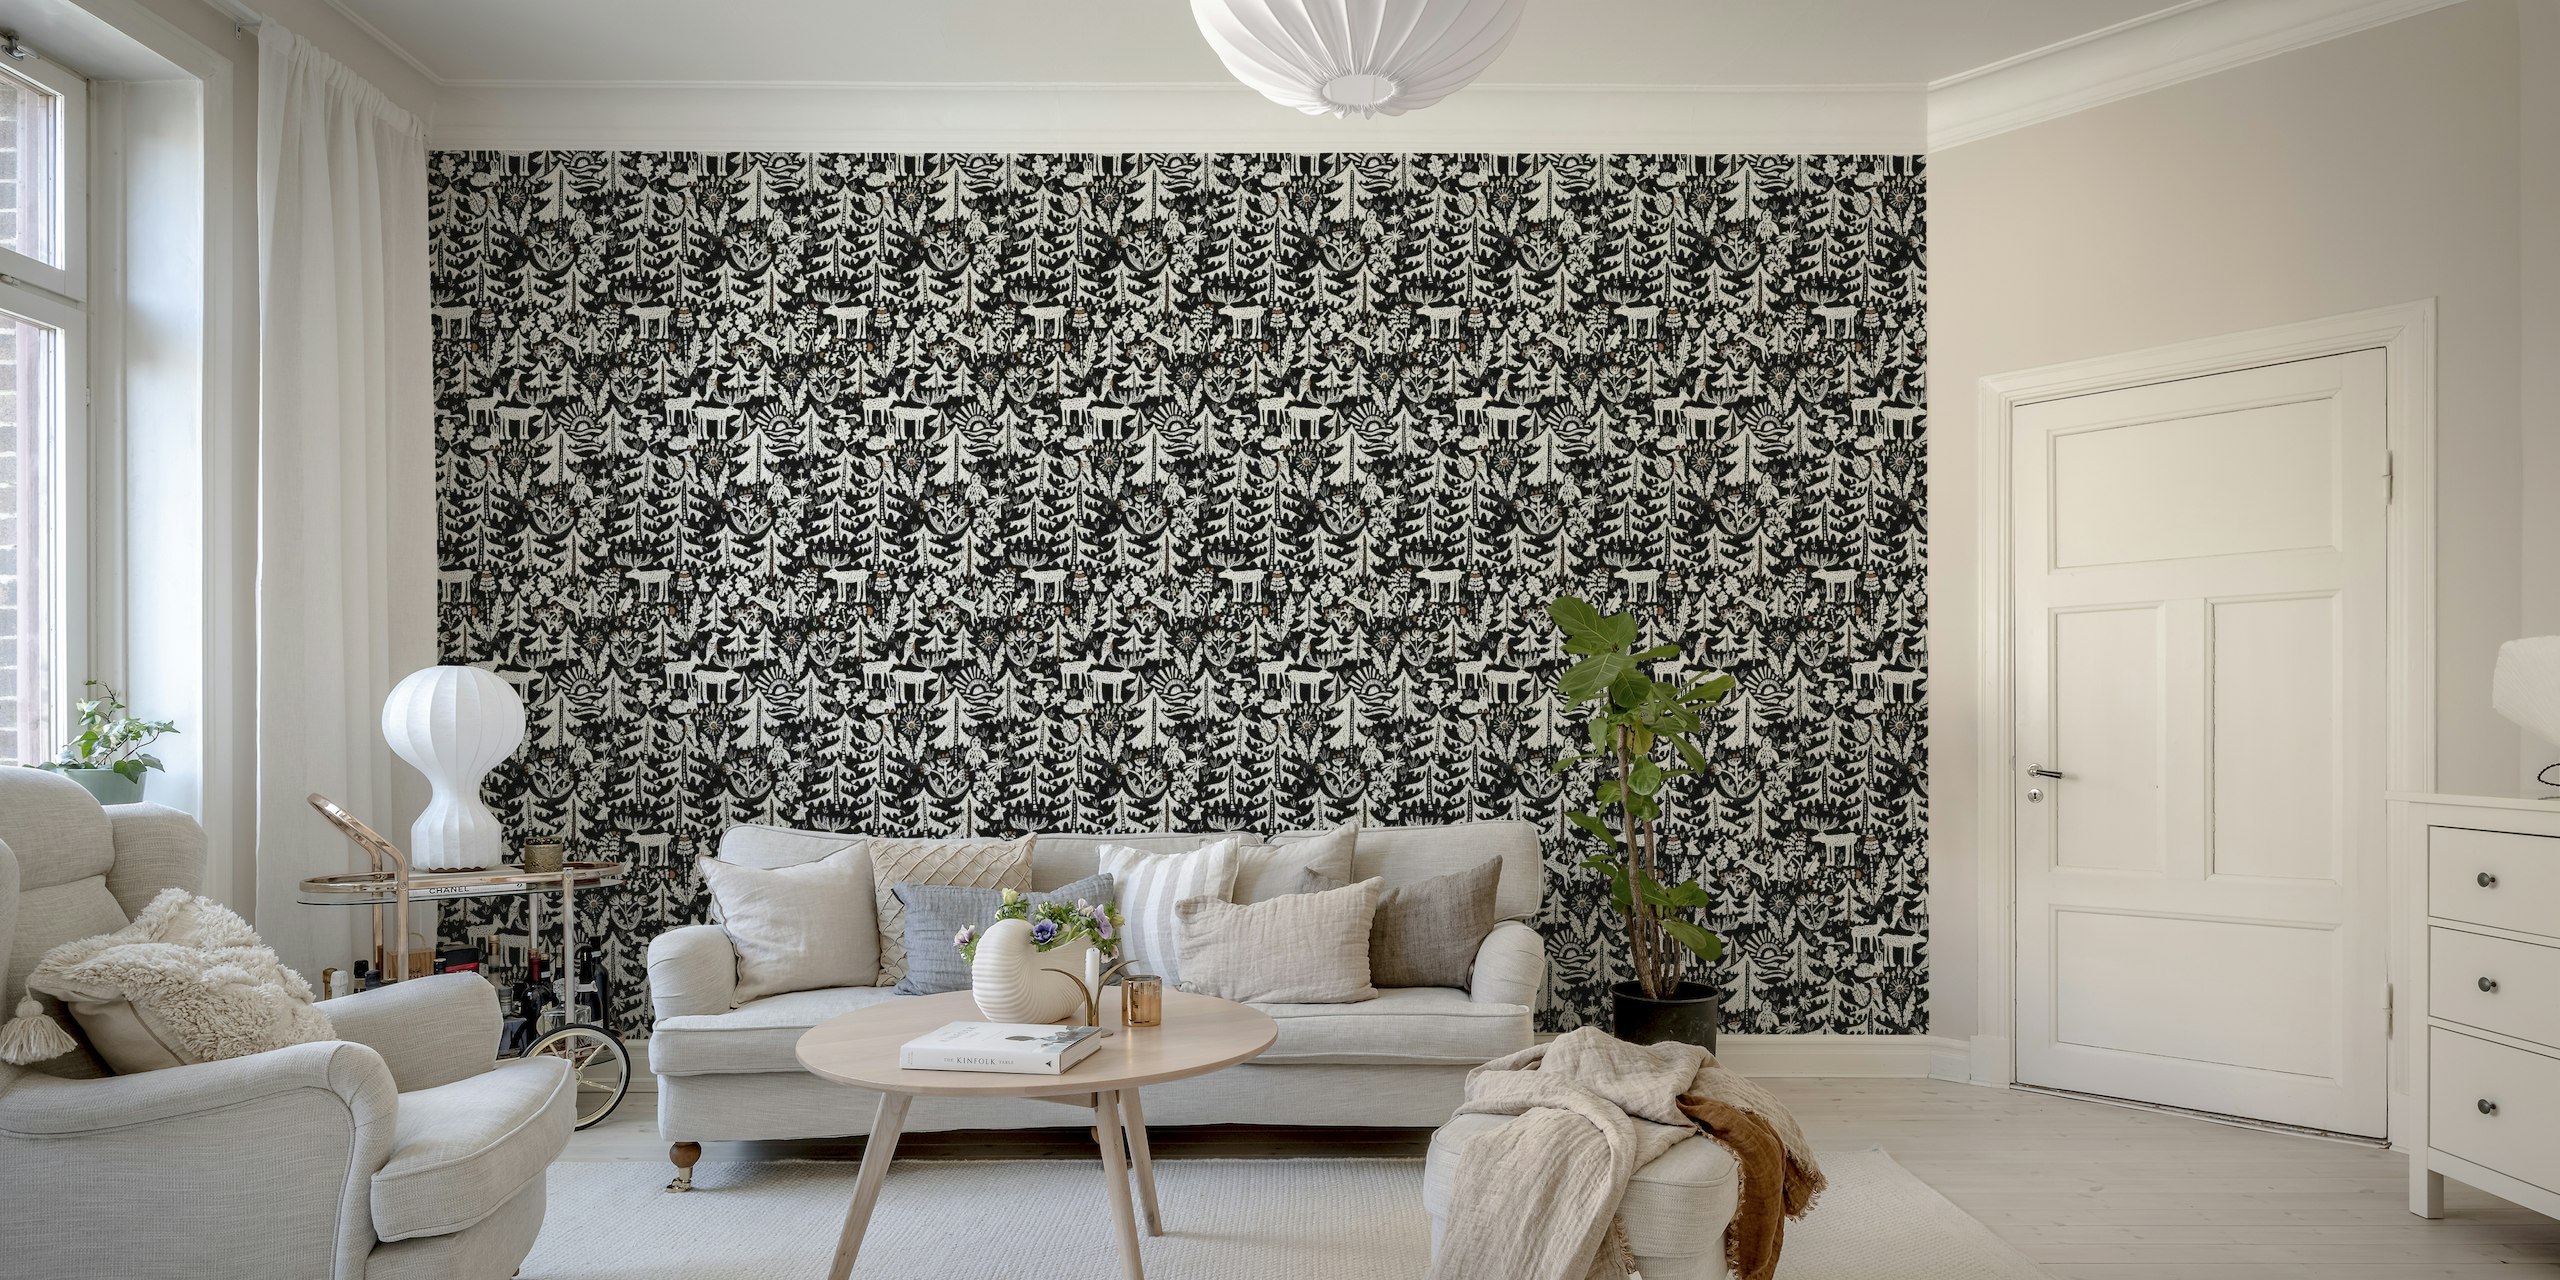 Black Forest black and white wall mural with stylized trees and wildlife